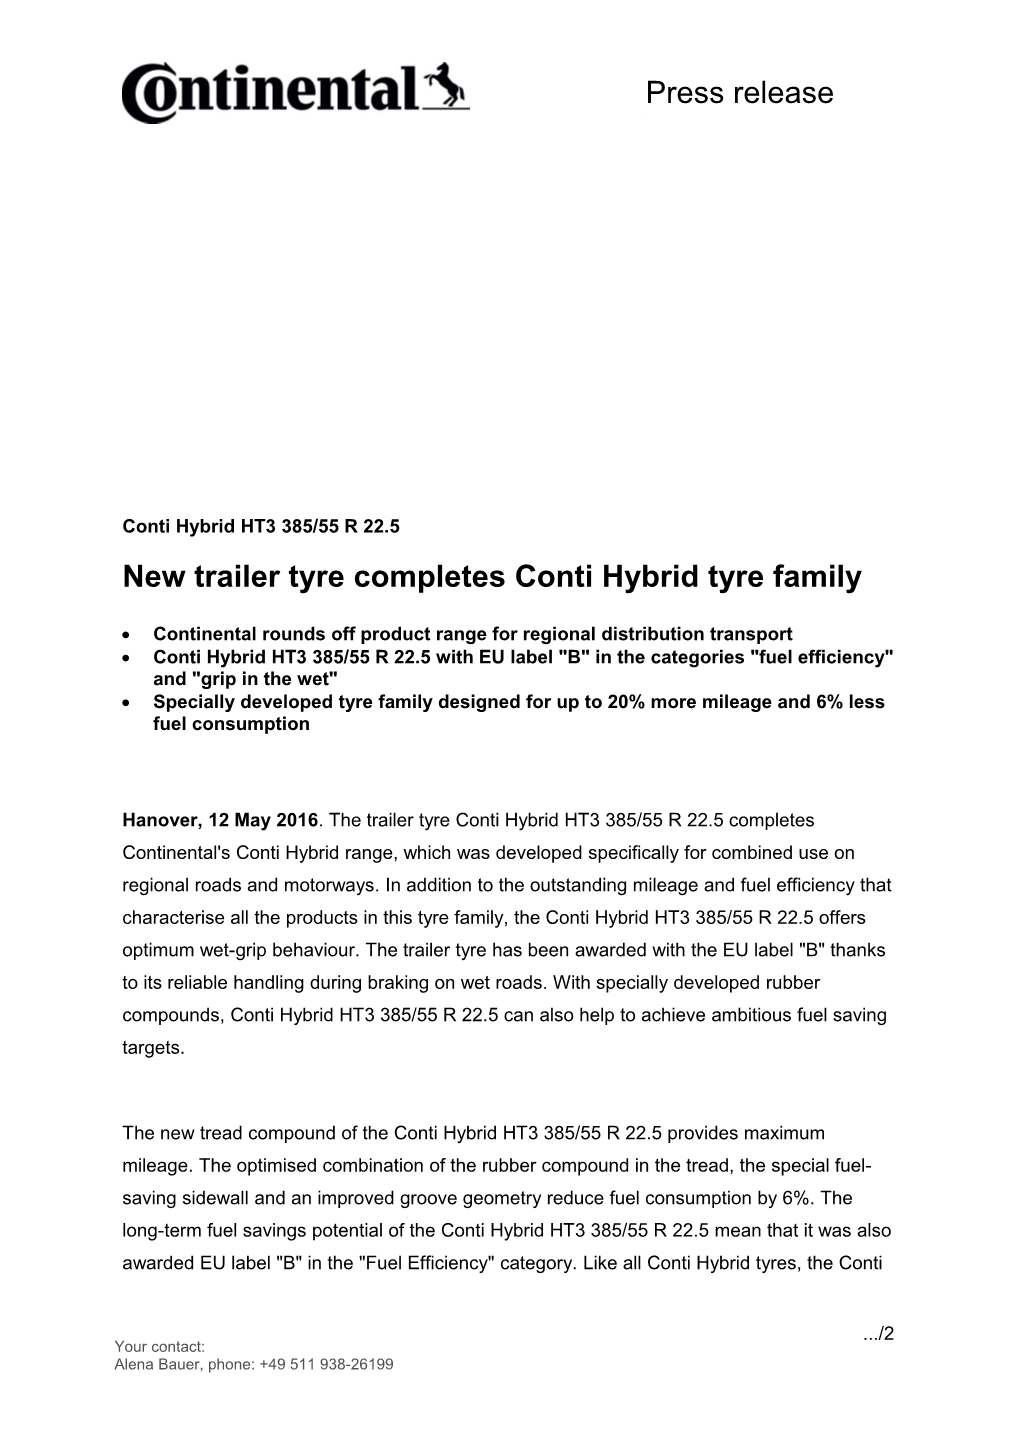 New Trailer Tyre Completes Conti Hybrid Tyre Family